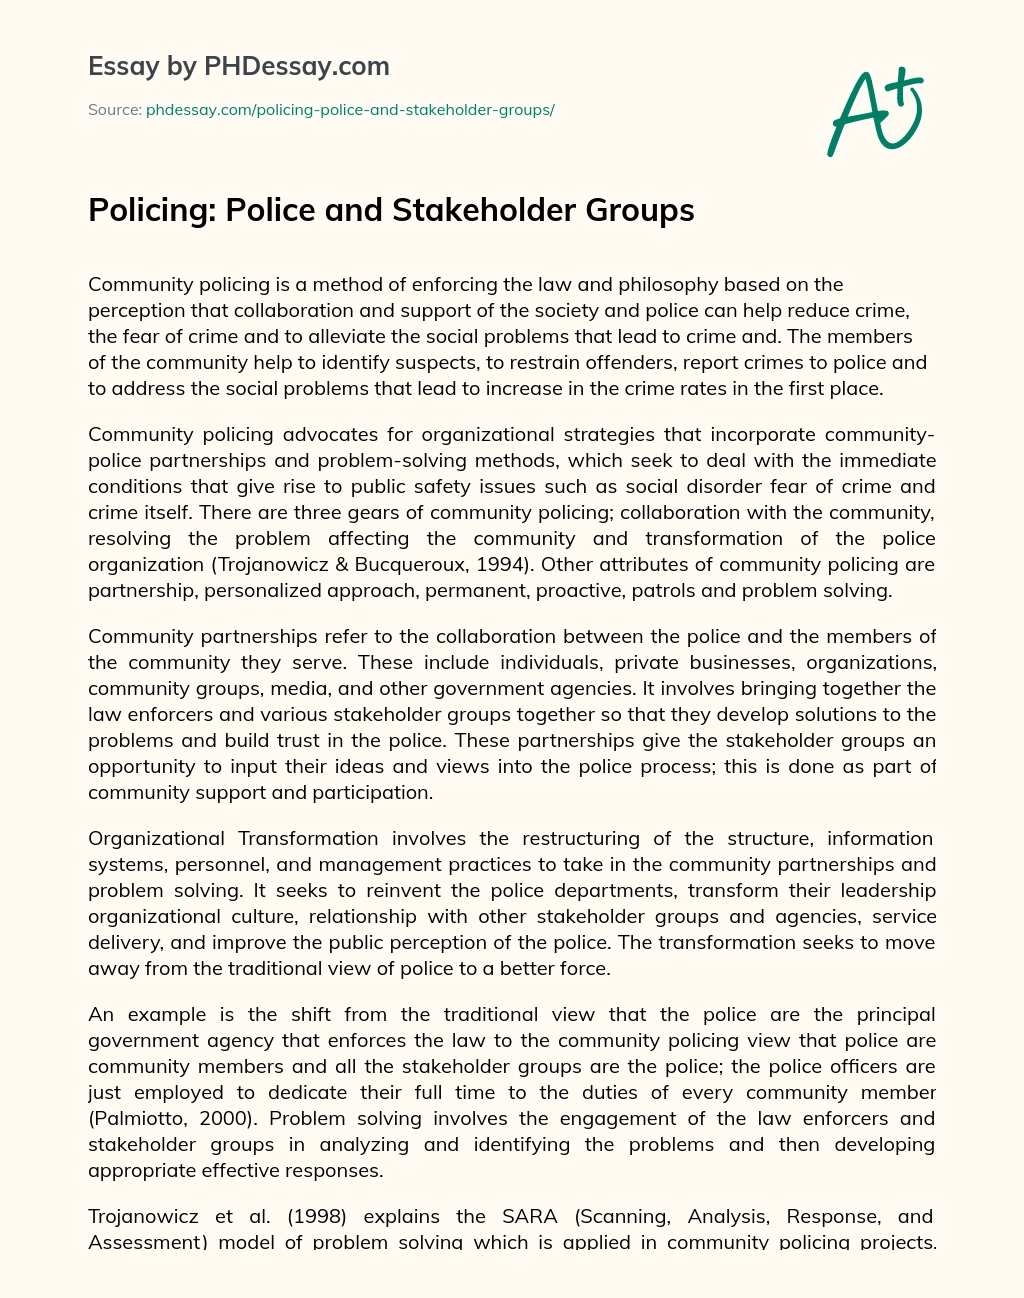 Policing: Police and Stakeholder Groups essay